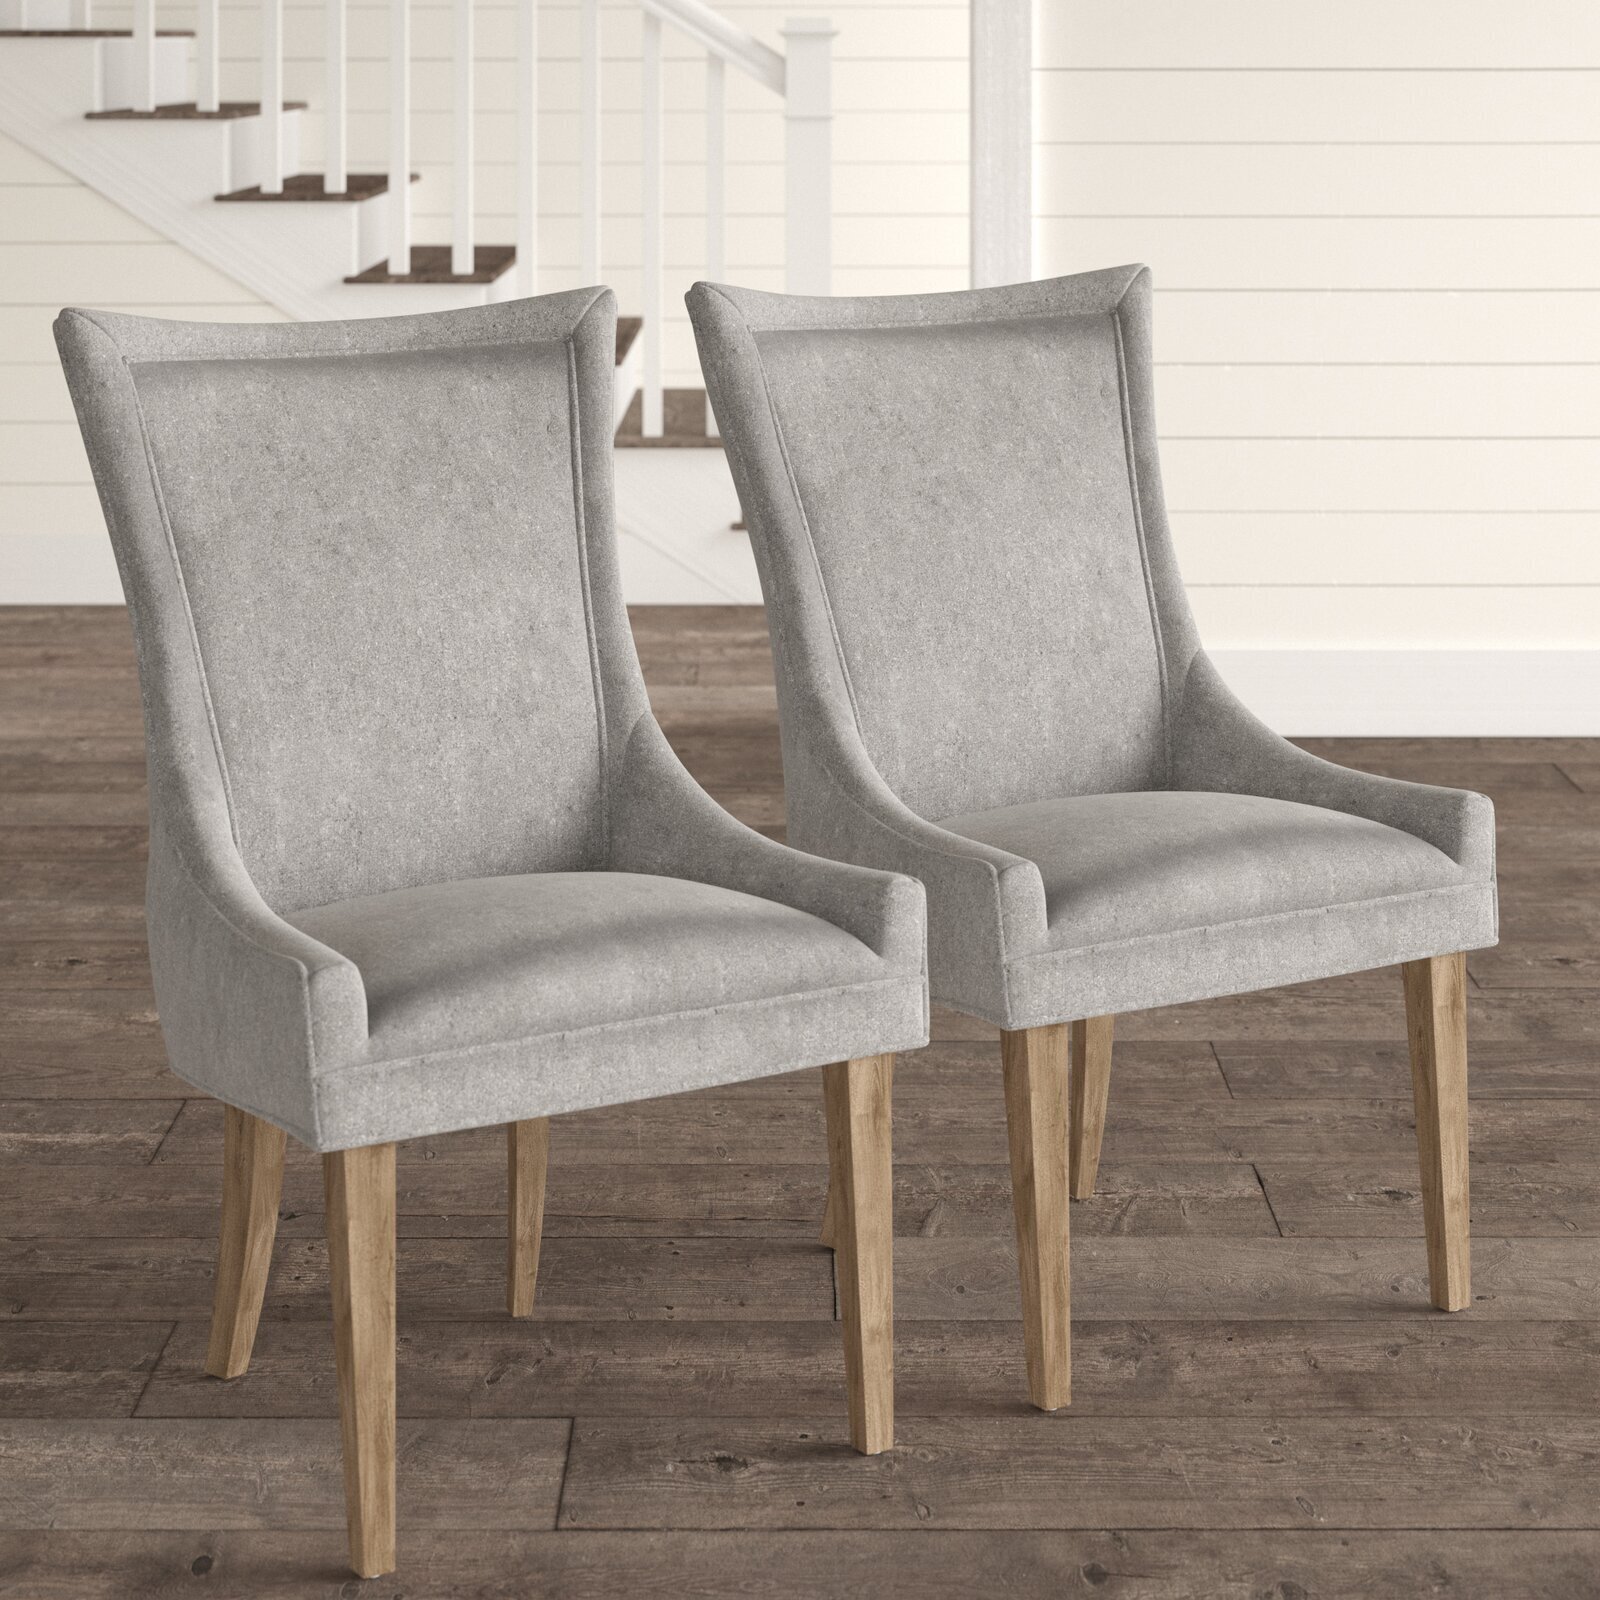 Sturdy dining room chairs with plush upholstery